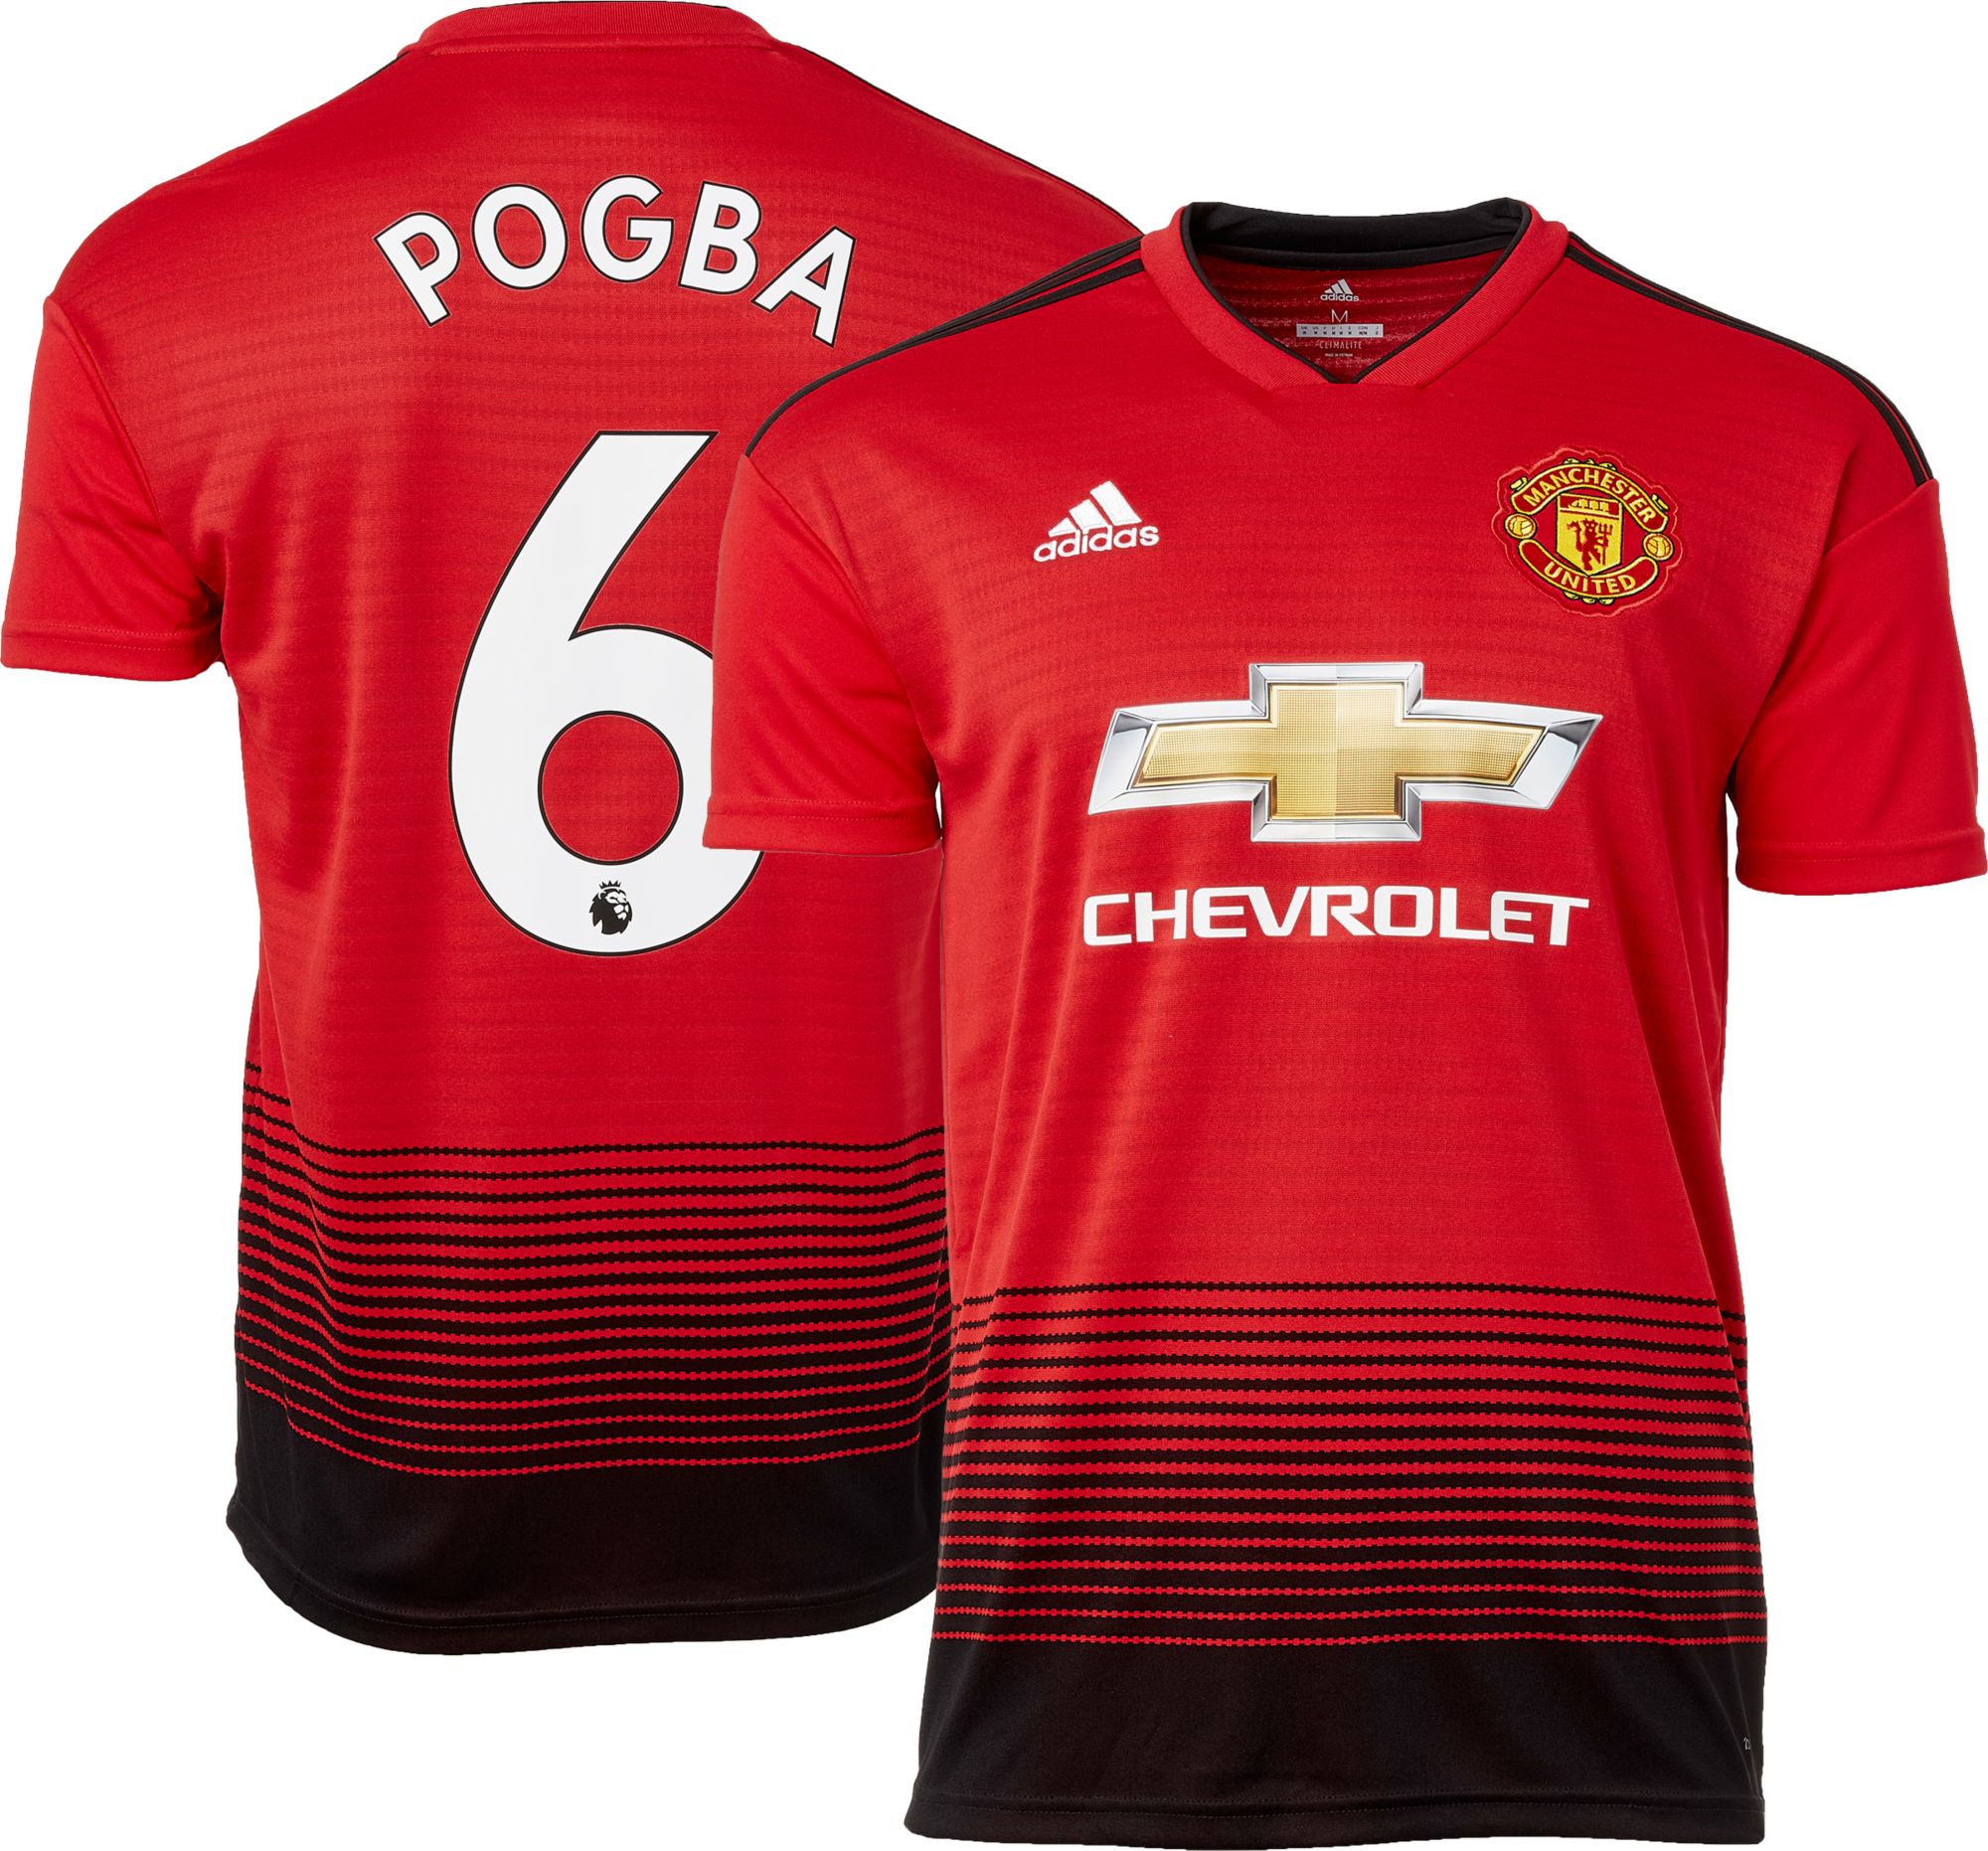 pogba manchester united jersey